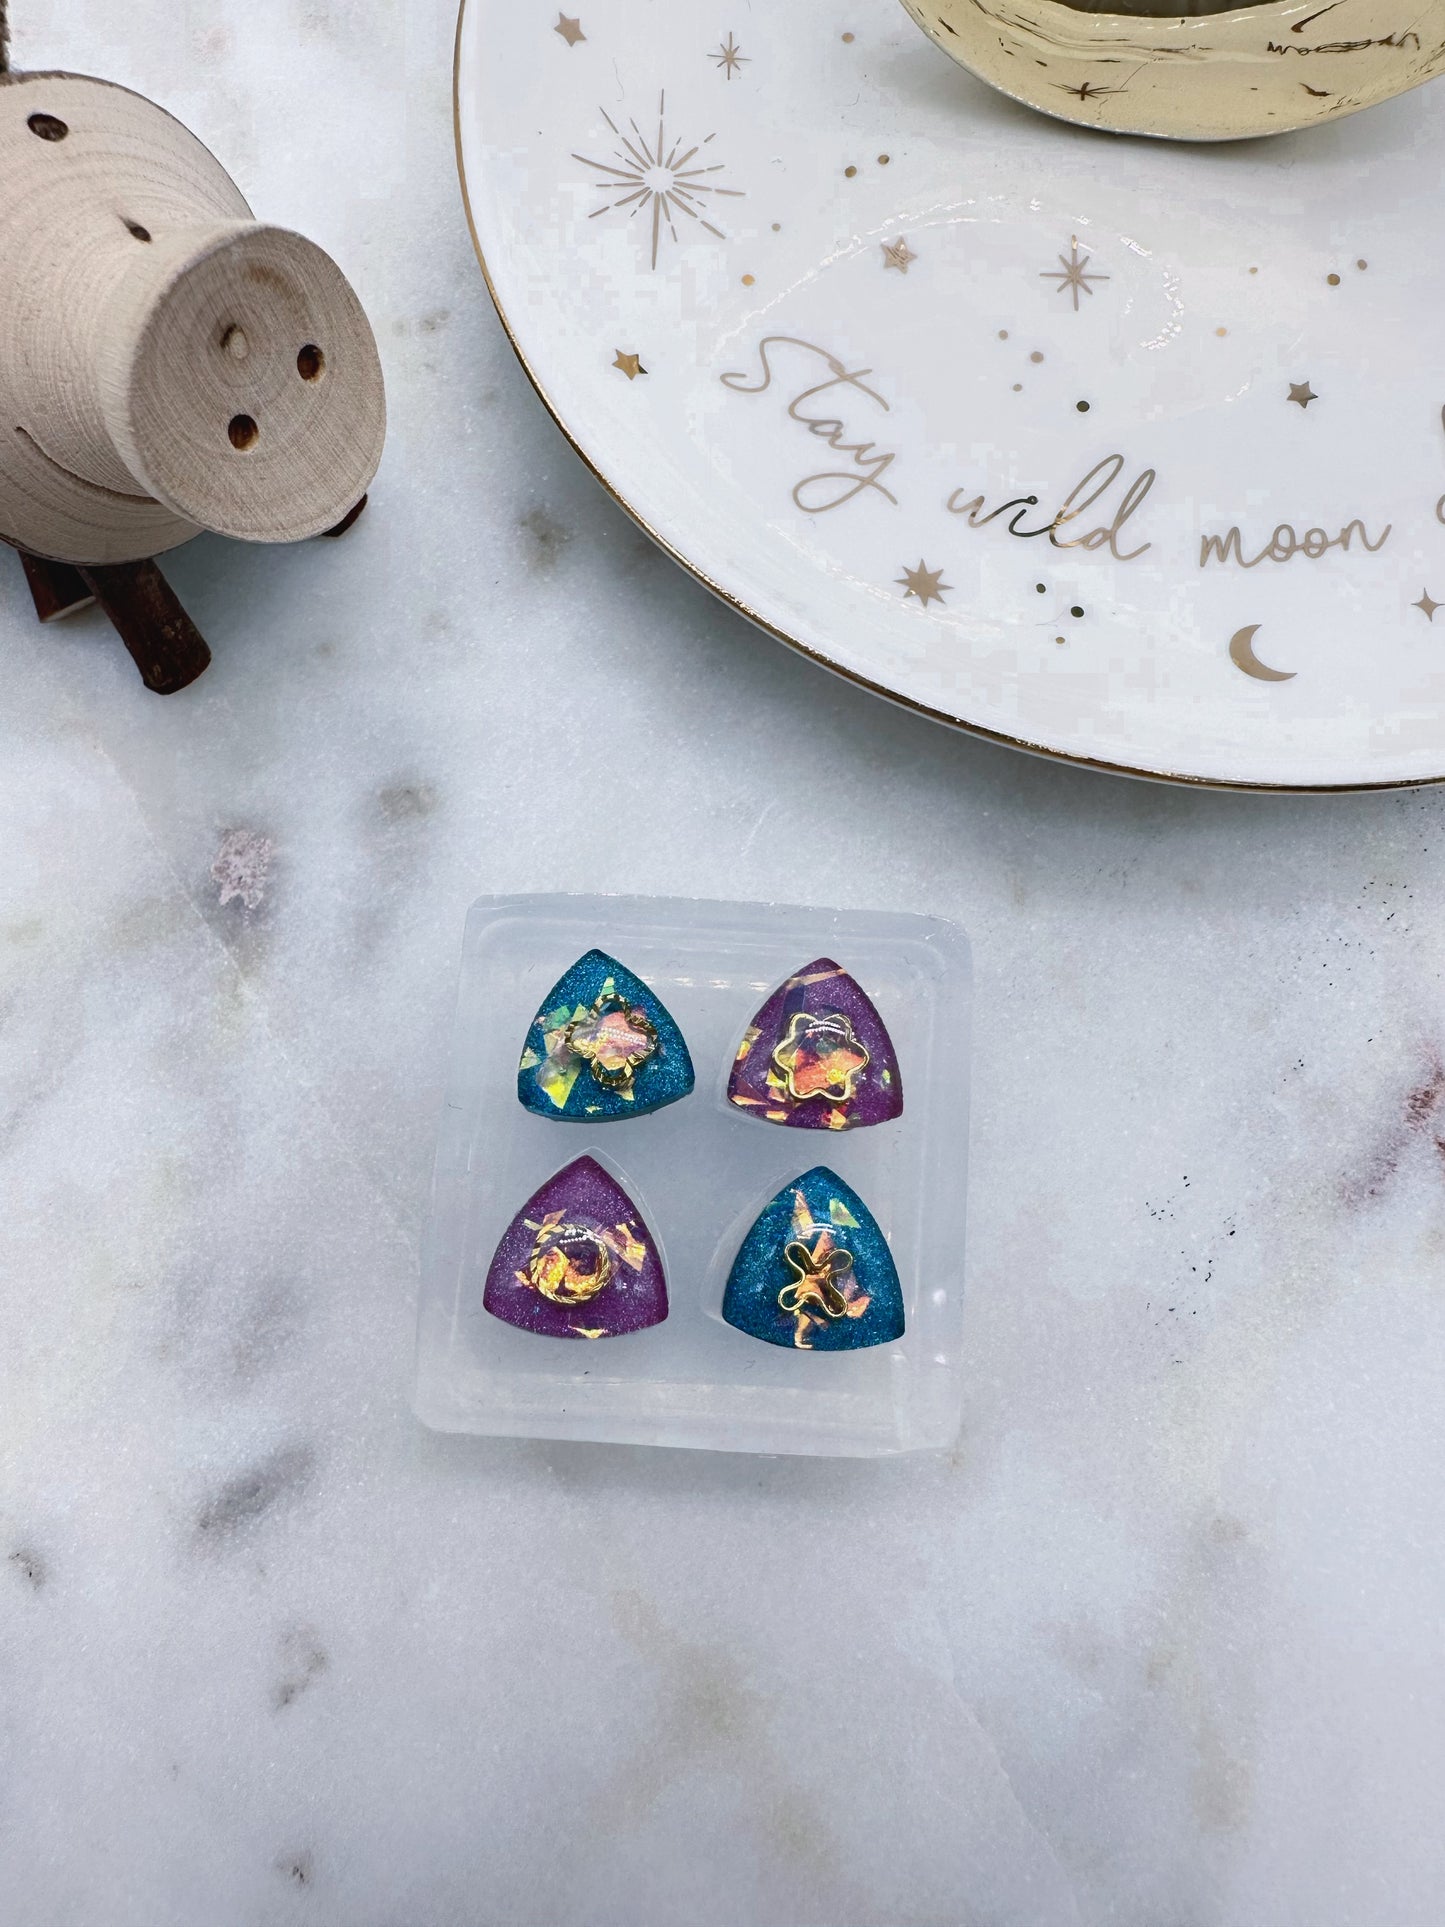 Pre domed 1.2 cm Rounded Triangle Shape Stud Earring Mold